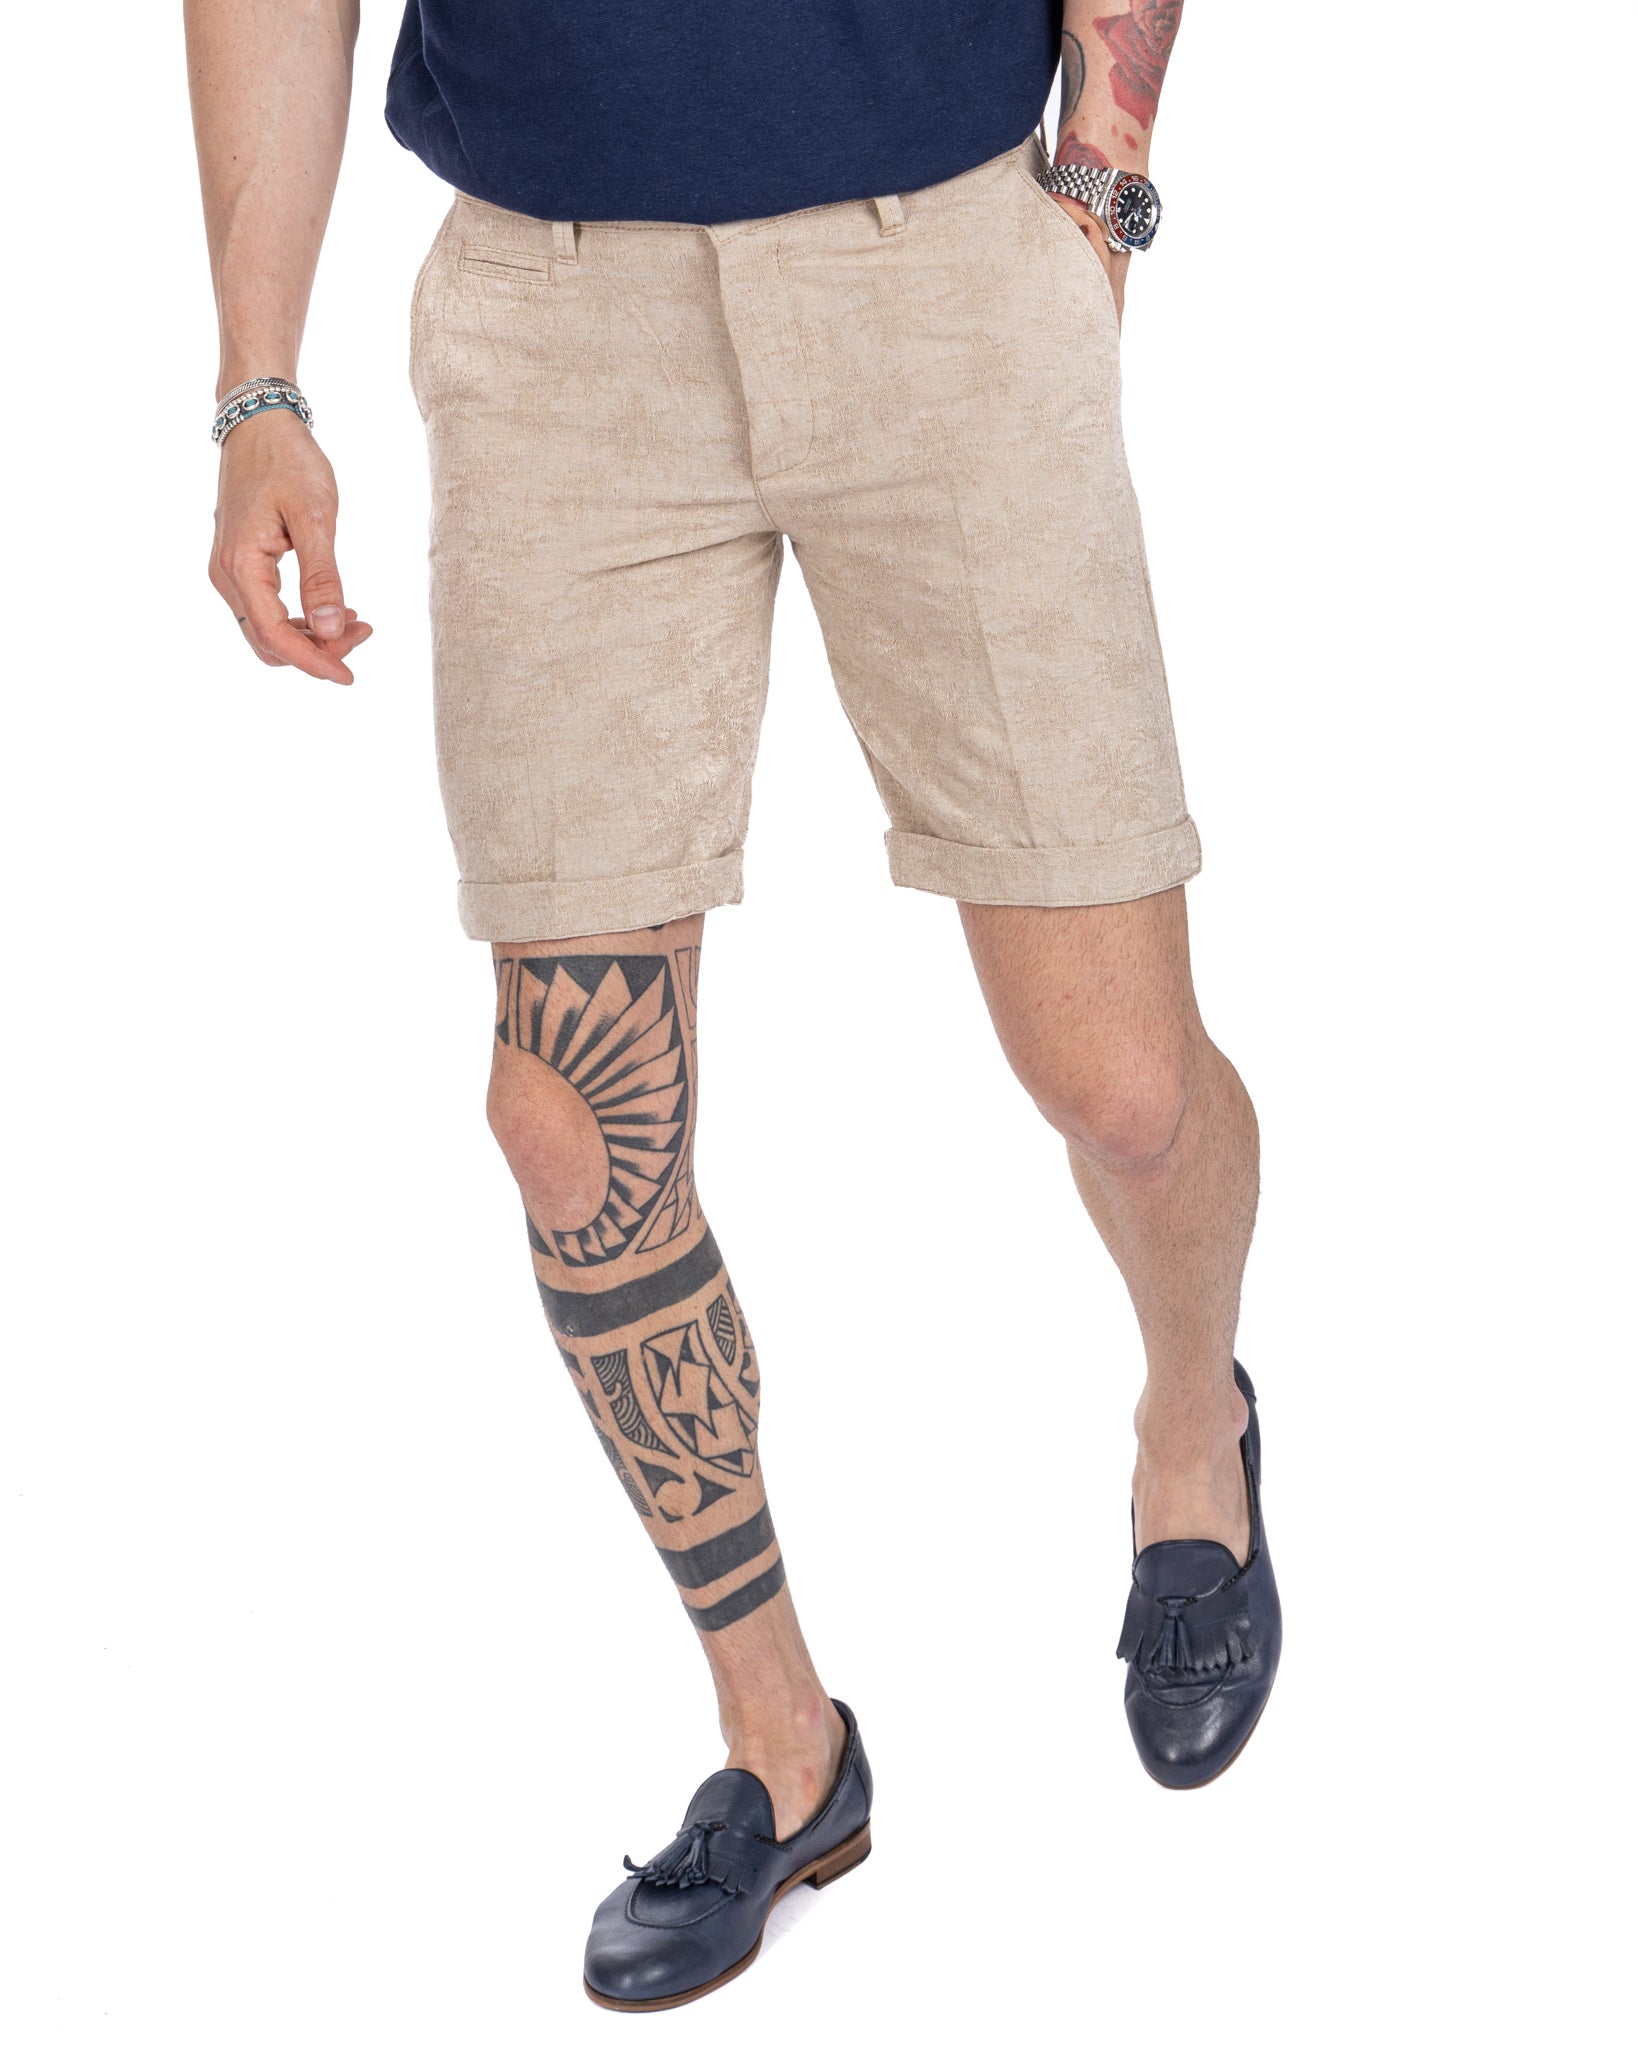 Bahama - beige Bermuda shorts with relief pattern